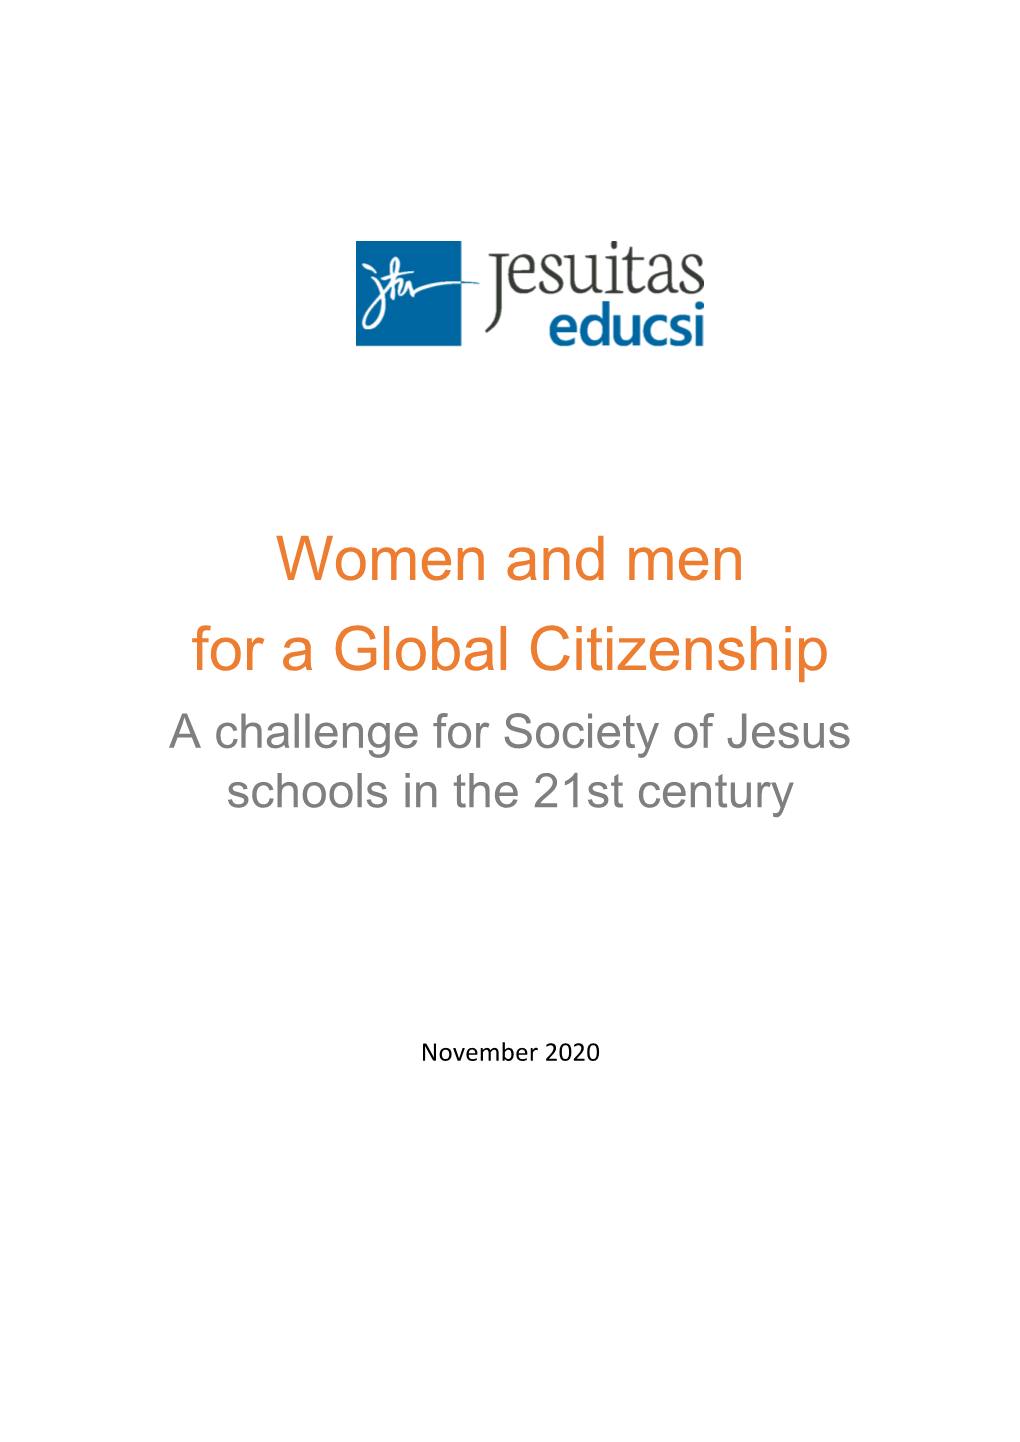 Women and Men for a Global Citizenship a Challenge for Society of Jesus Schools in the 21St Century